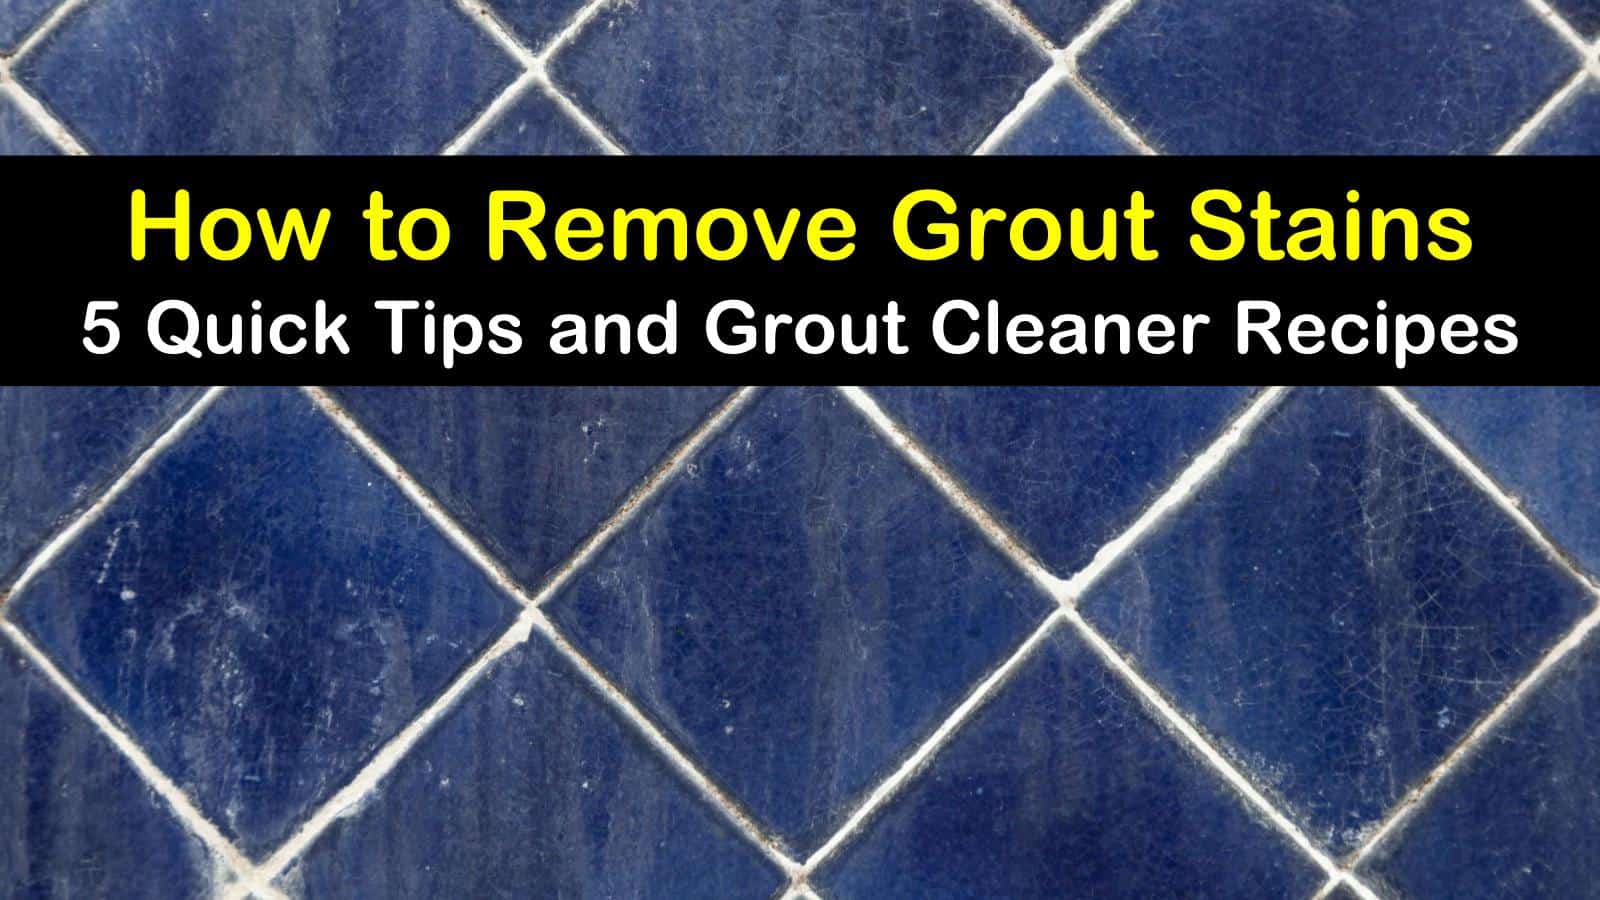 how to remove grout stains titleimg1